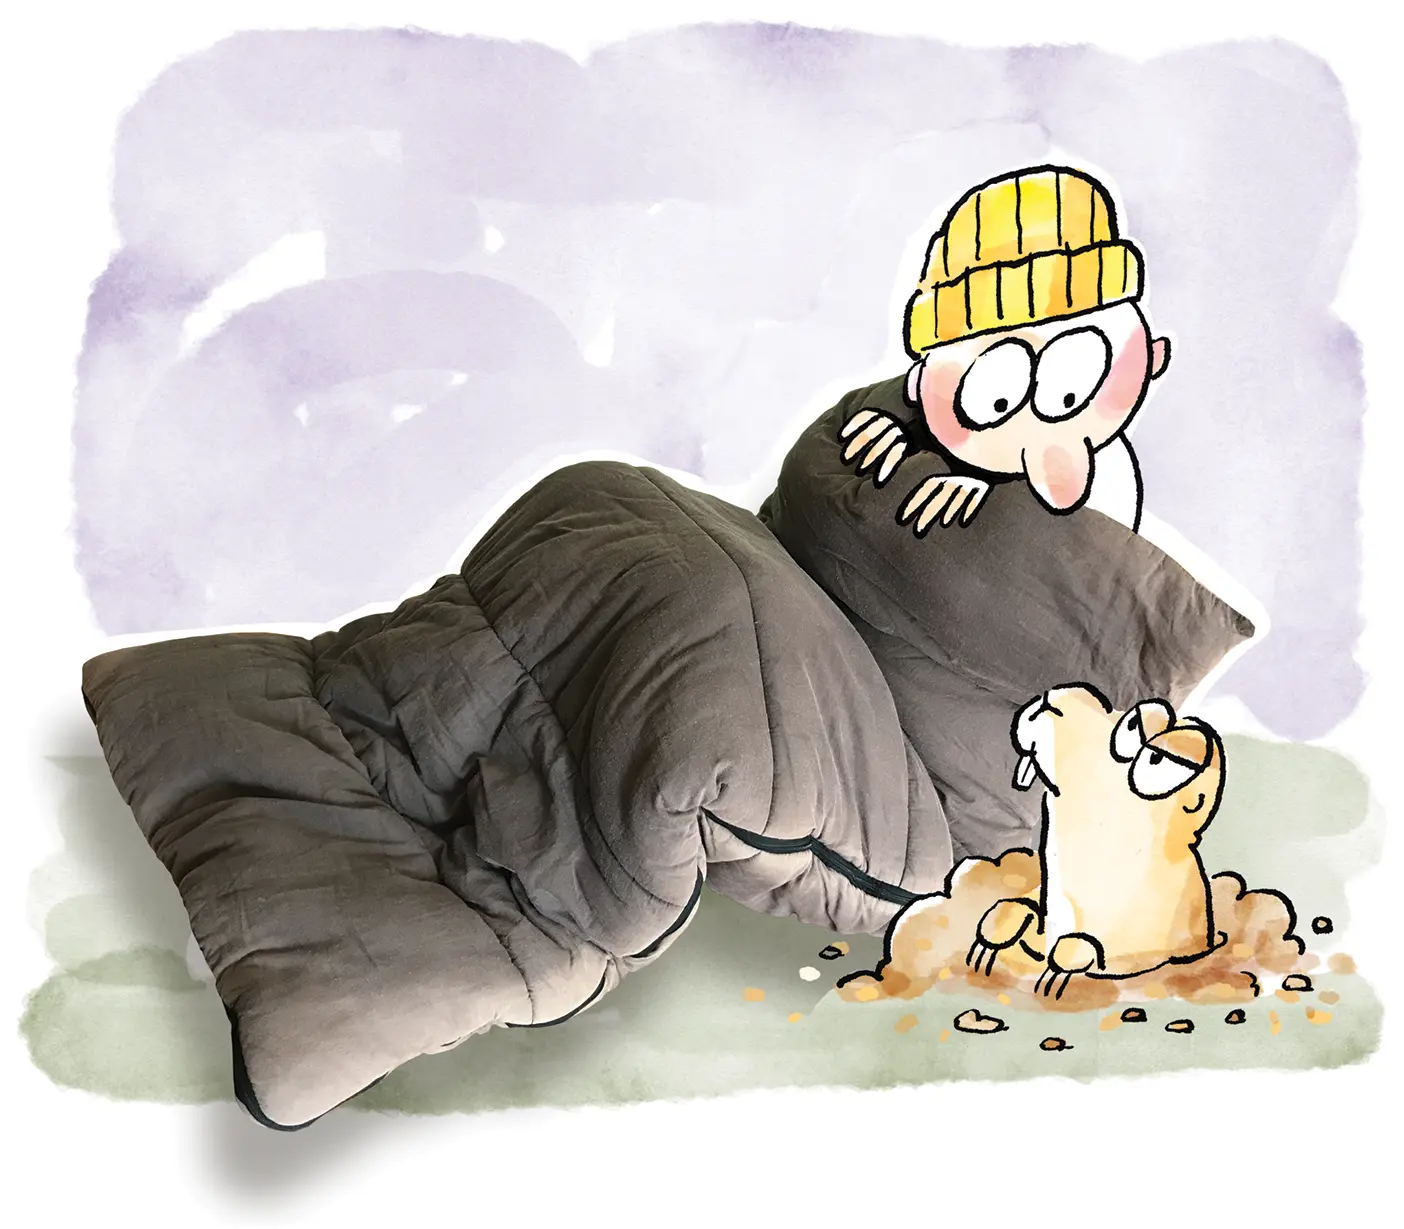 A prairie dog pops up next to a man in a sleeping bag.